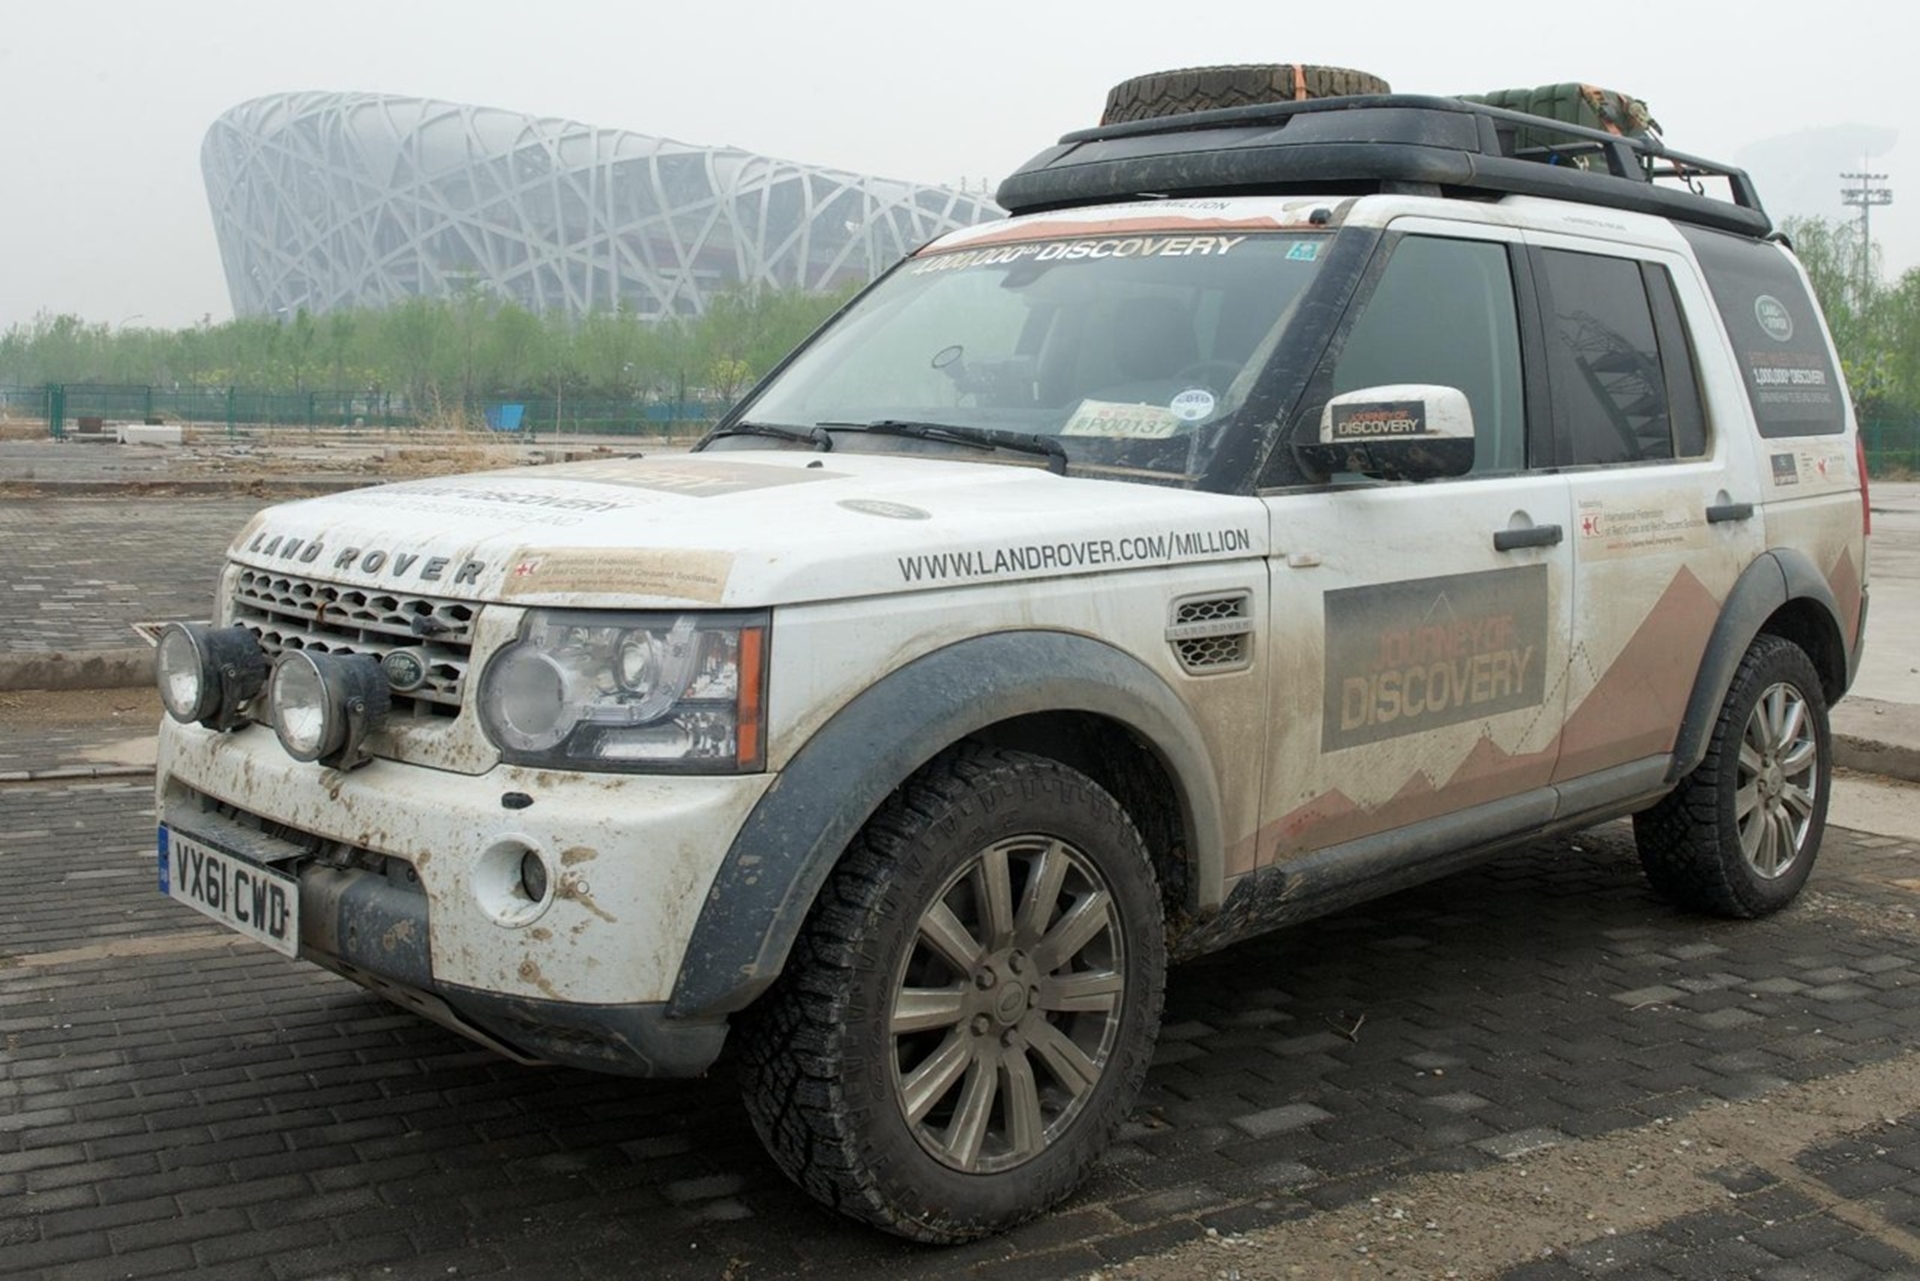 LAND ROVER CELEBRATES COMPLETION OF THE JOURNEY OF DISCOVERY AT GOODWOOD FESTIVAL OF SPEED